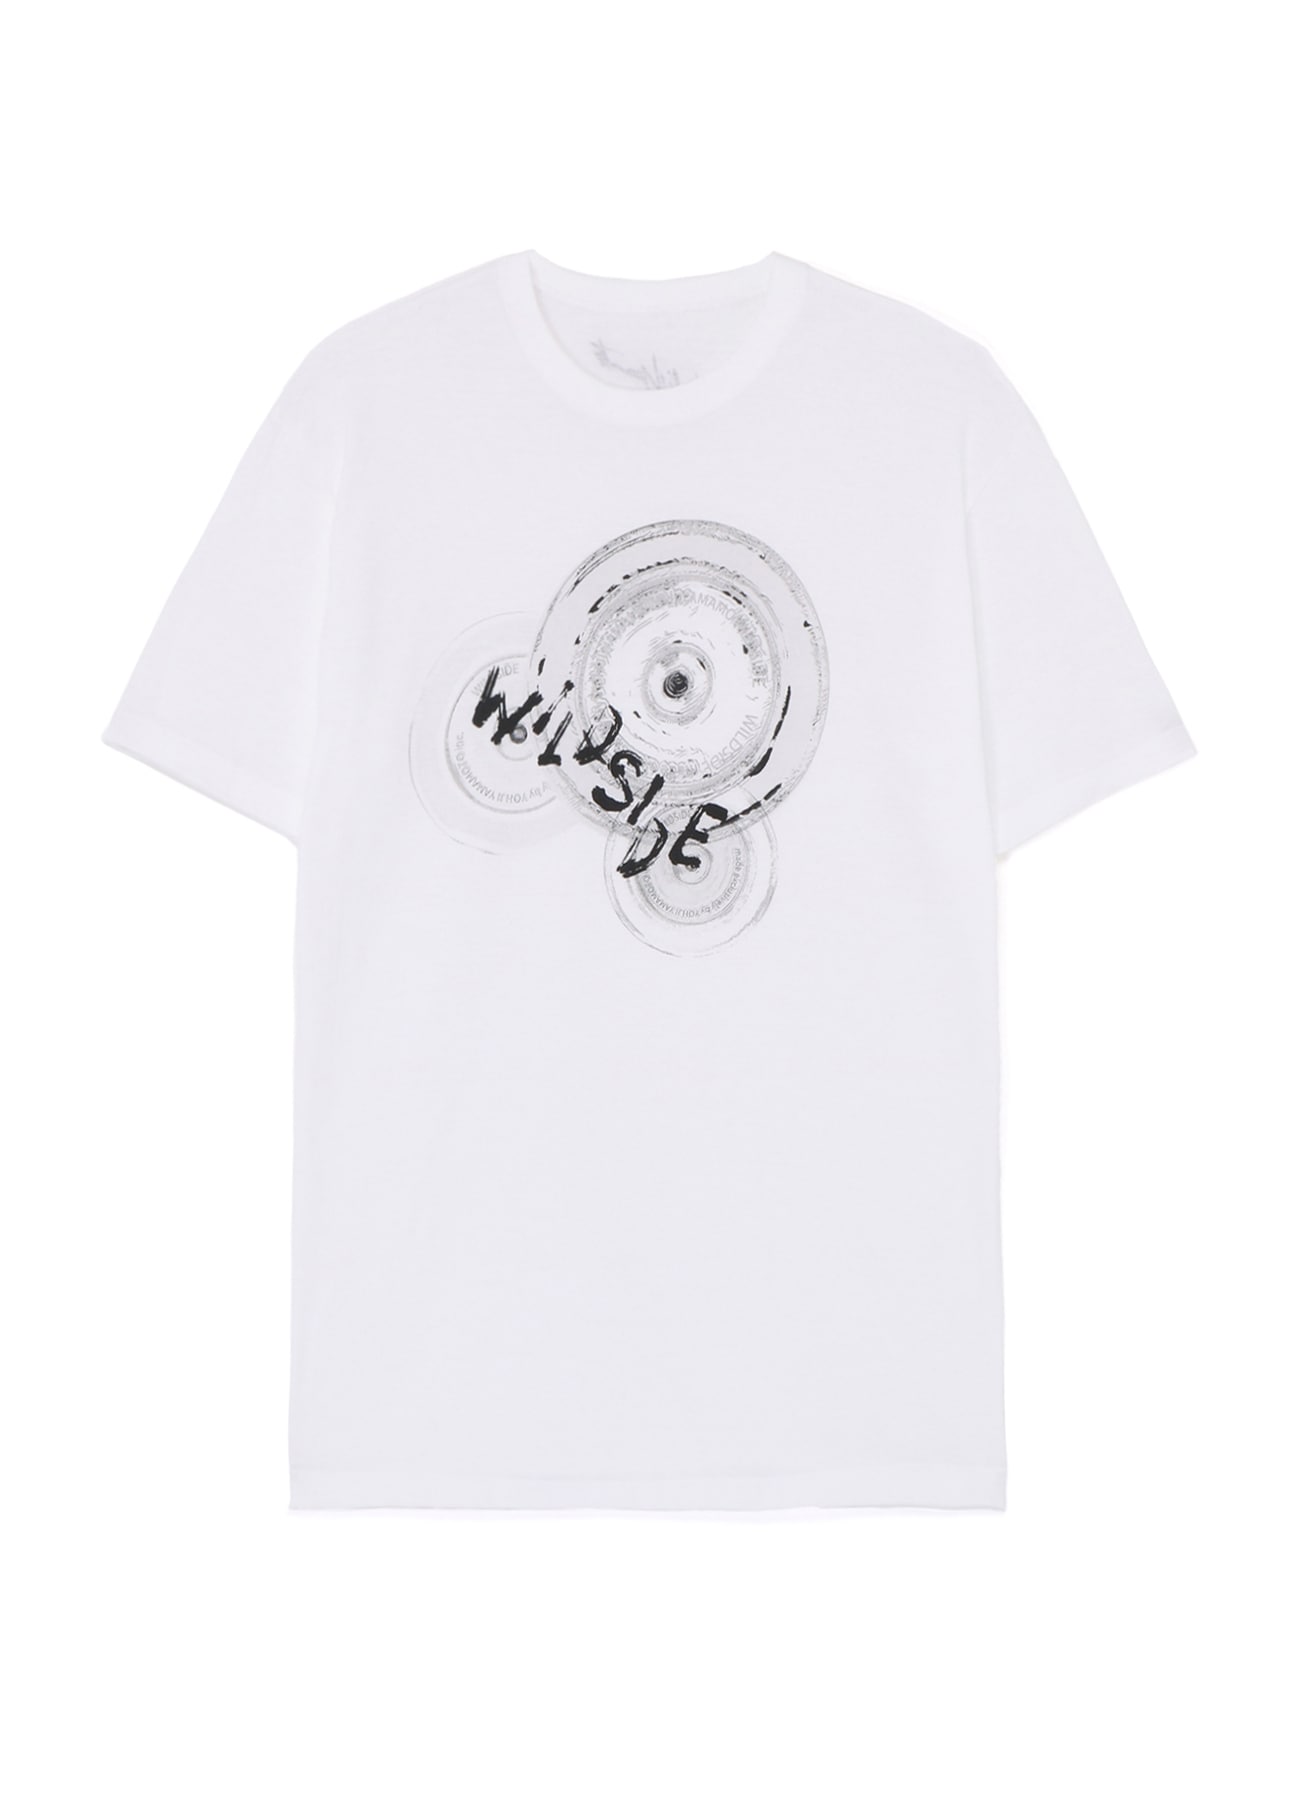 WILDSIDE 3 Records T-shirt